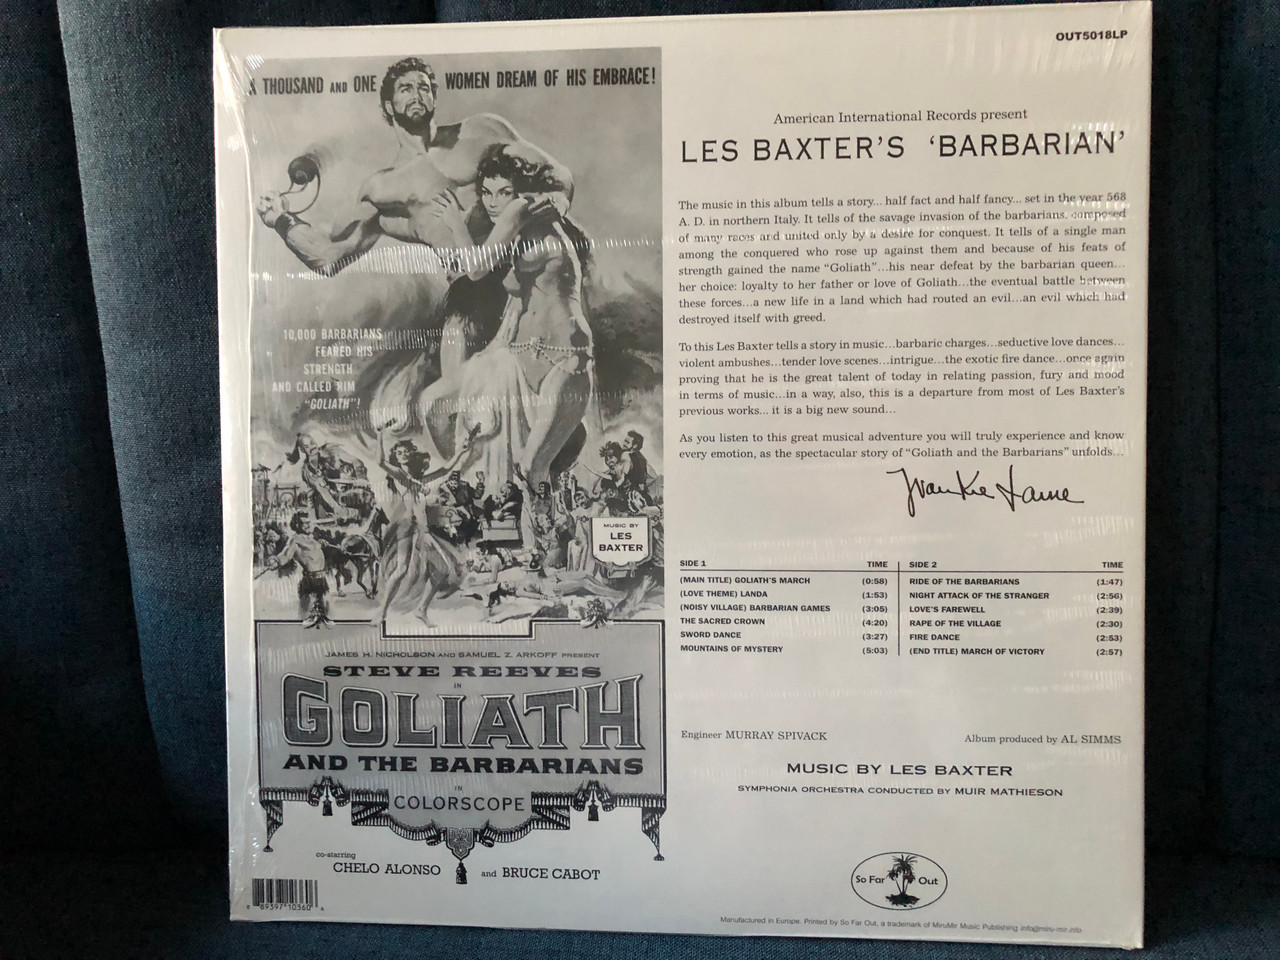 https://cdn10.bigcommerce.com/s-62bdpkt7pb/products/0/images/228449/Les_Baxters_Barbarian_Sound_Track_From_The_Motion_Picture_Goliath_And_The_Barbarians_So_Far_Out_LP_2014_OUT5018LP_2__26676.1653315463.1280.1280.JPG?c=2&_gl=1*vu2fy2*_ga*MjA2NTIxMjE2MC4xNTkwNTEyNTMy*_ga_WS2VZYPC6G*MTY1MzMxMzg4Mi40MDcuMS4xNjUzMzE1MTE4LjQ5